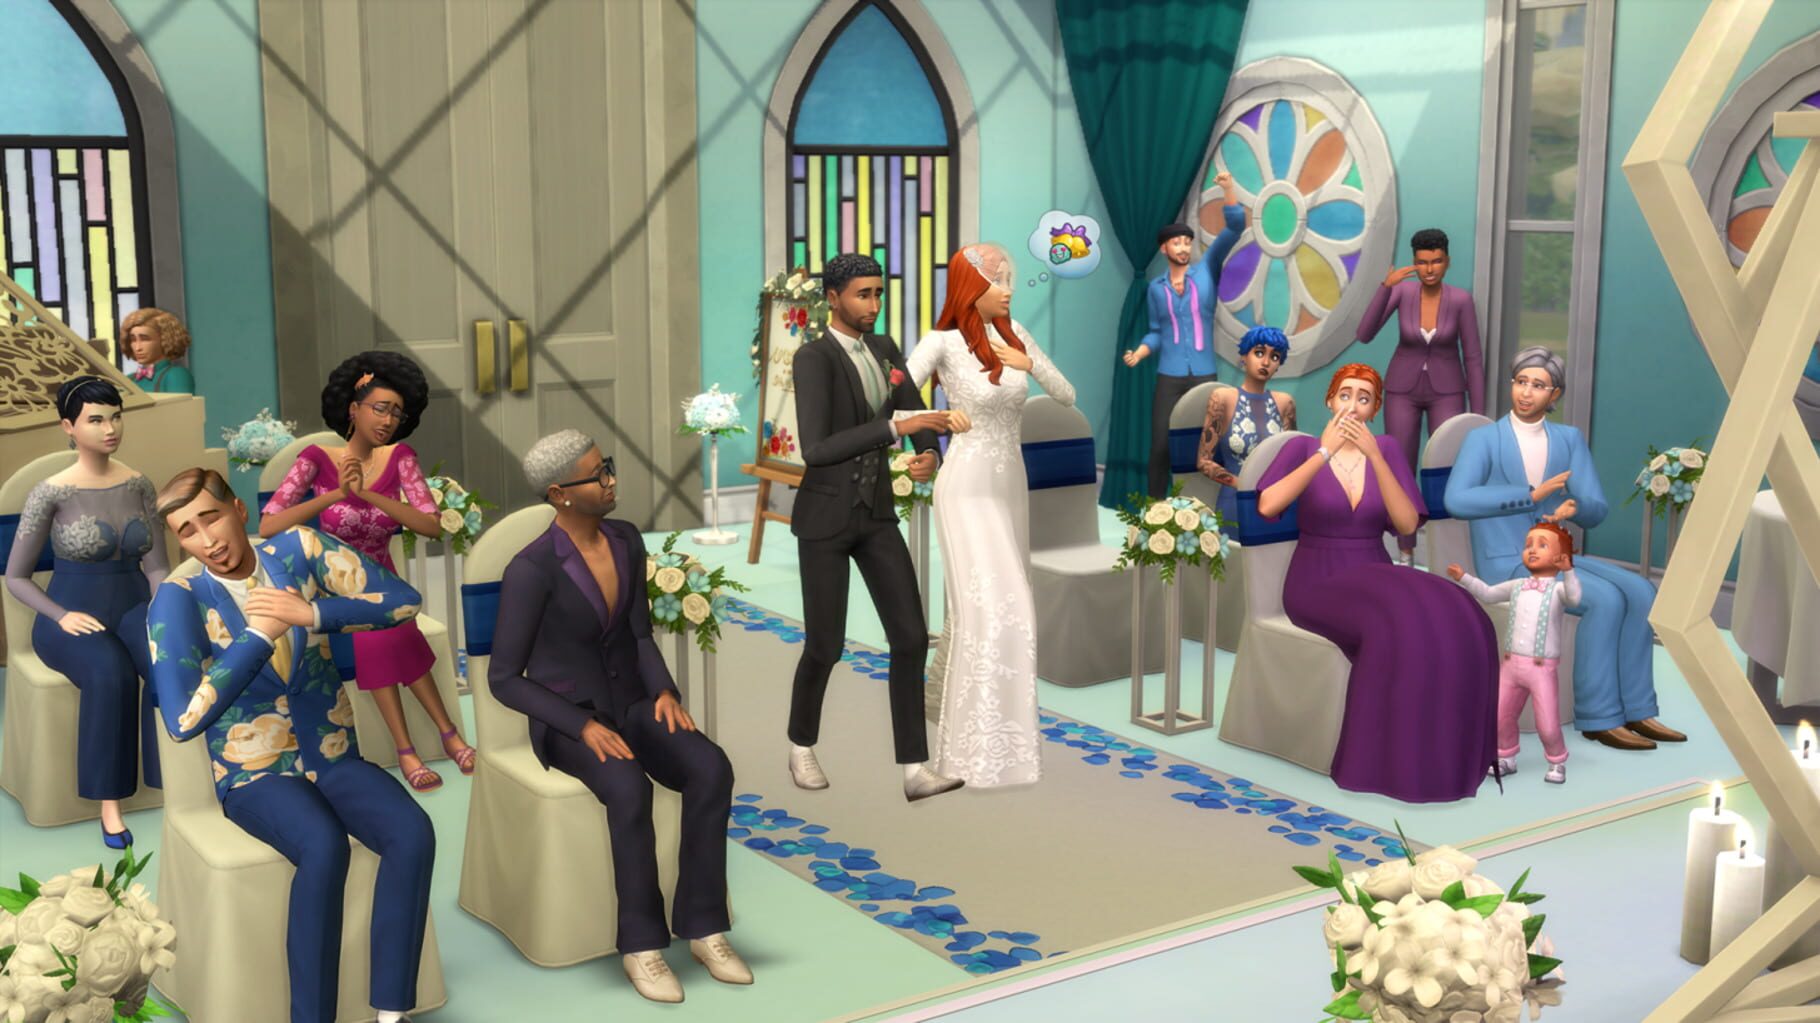 The Sims 4: My Wedding Stories Image